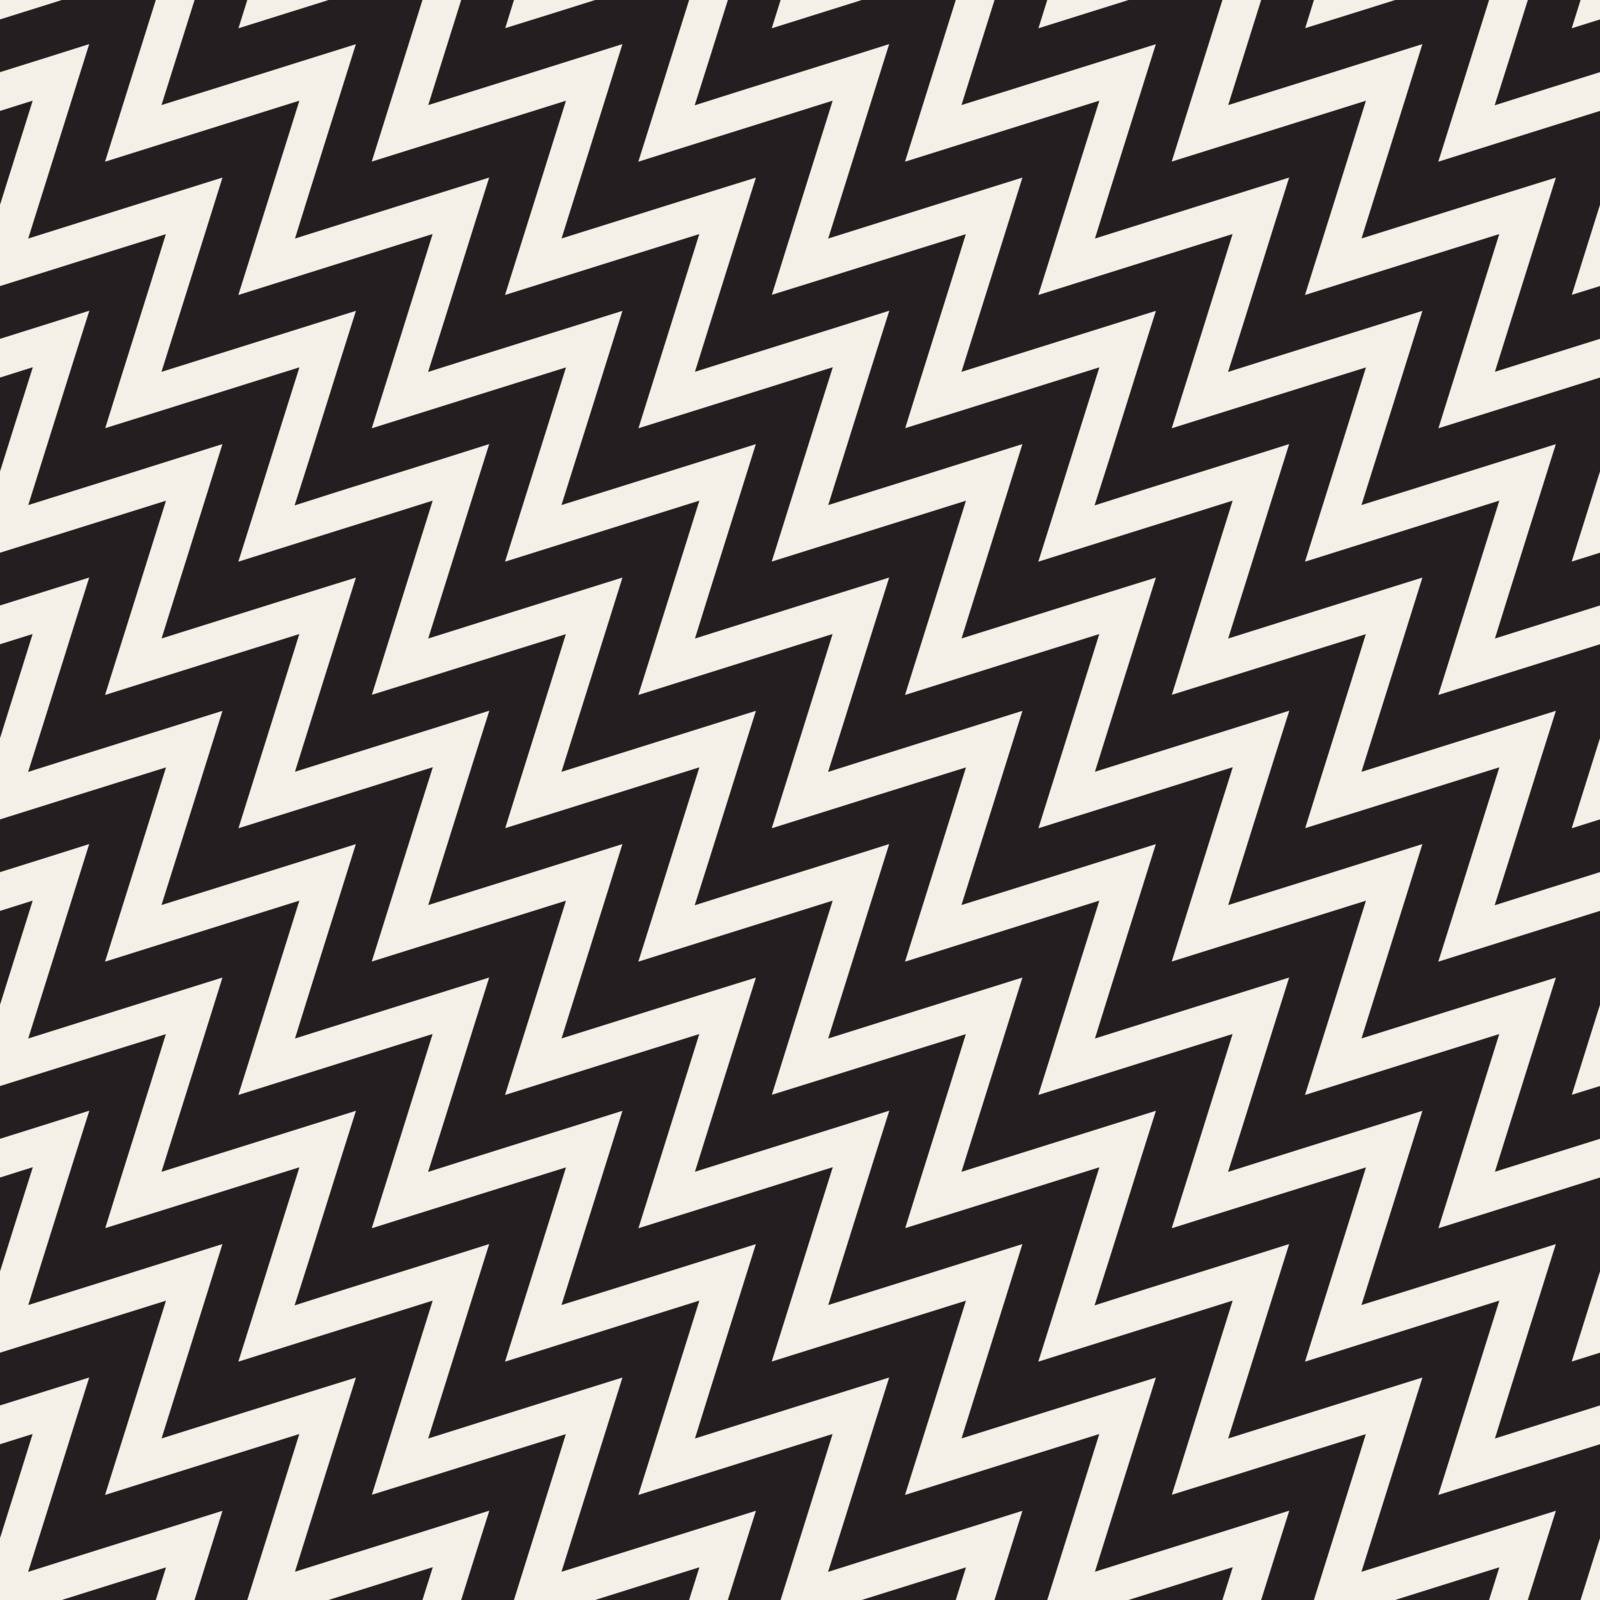 Vector Seamless Black and White ZigZag Diagonal Lines Geometric Pattern. Abstract Geometric Background Design